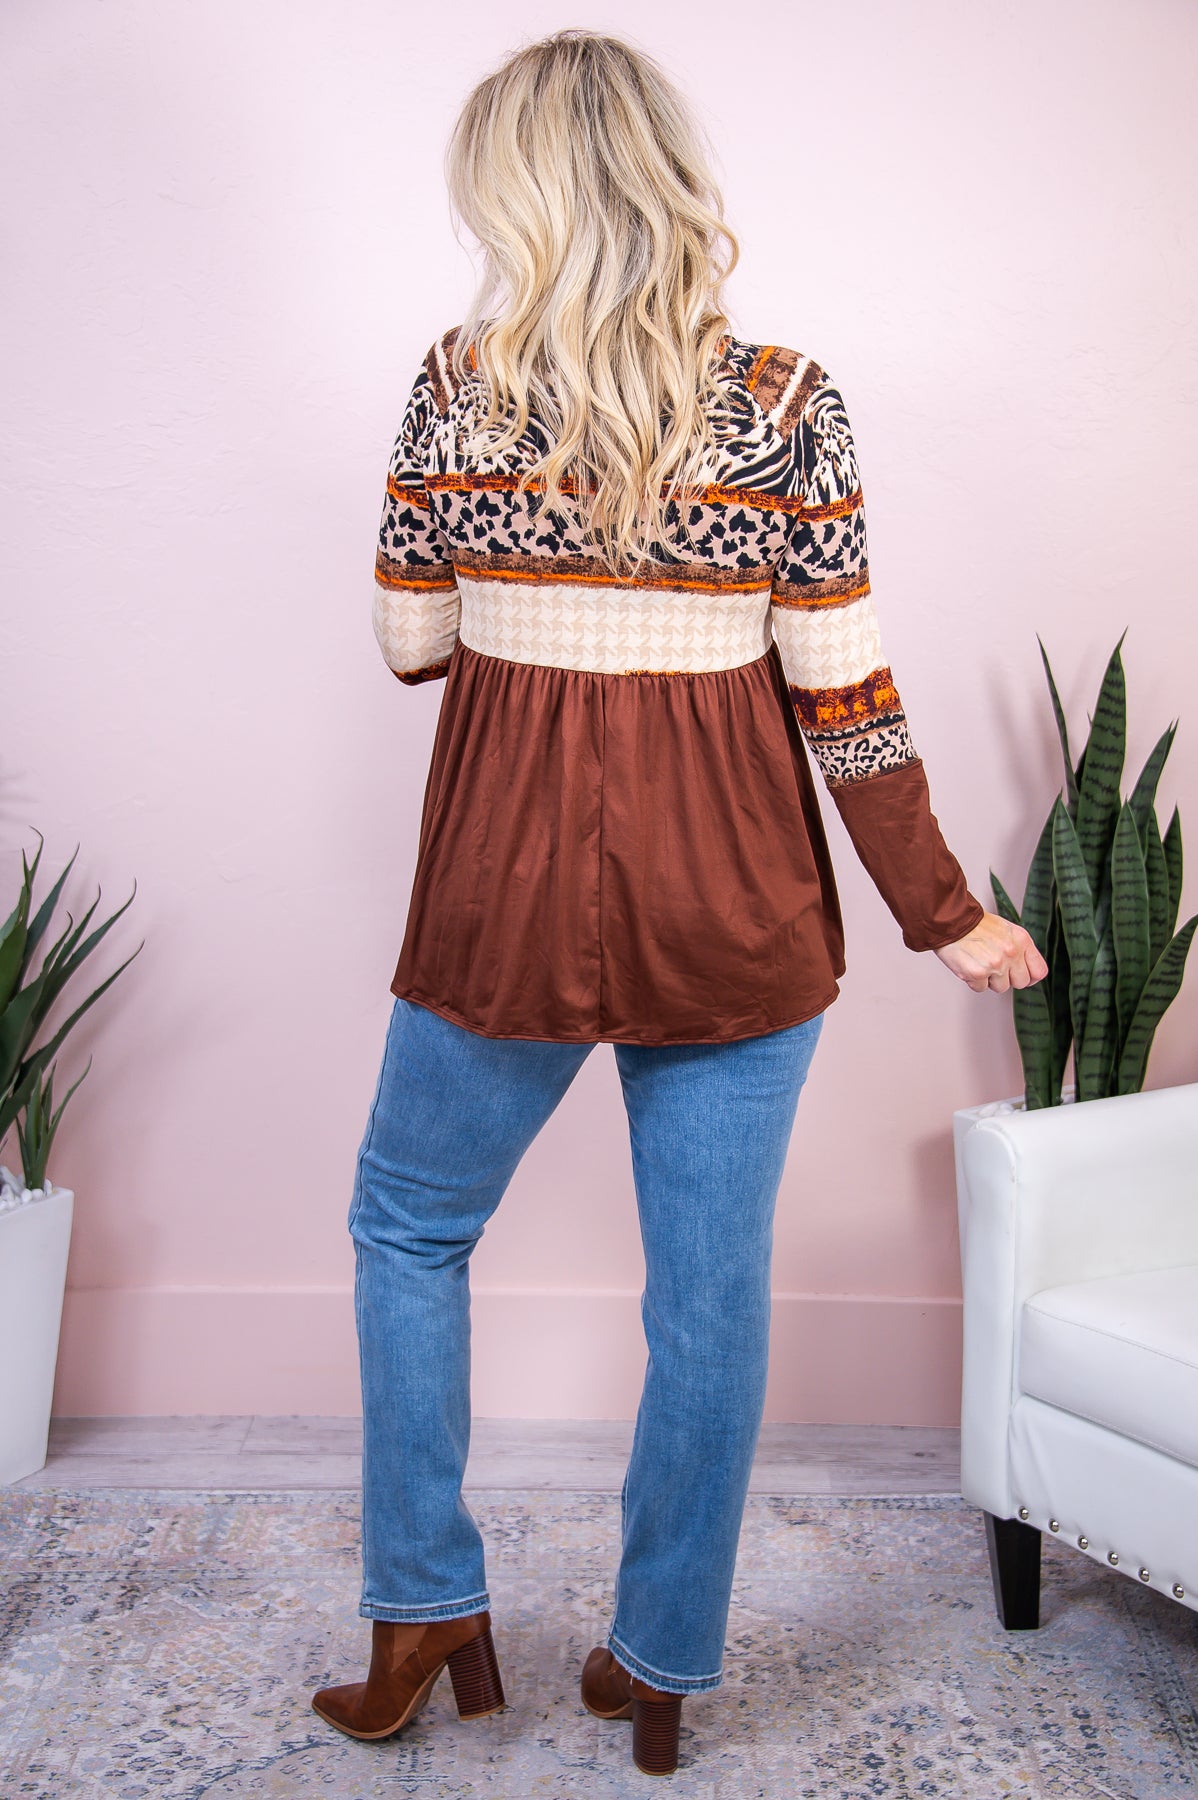 Wild And In Style Brown/Multi Color/Pattern Top - T8140BR